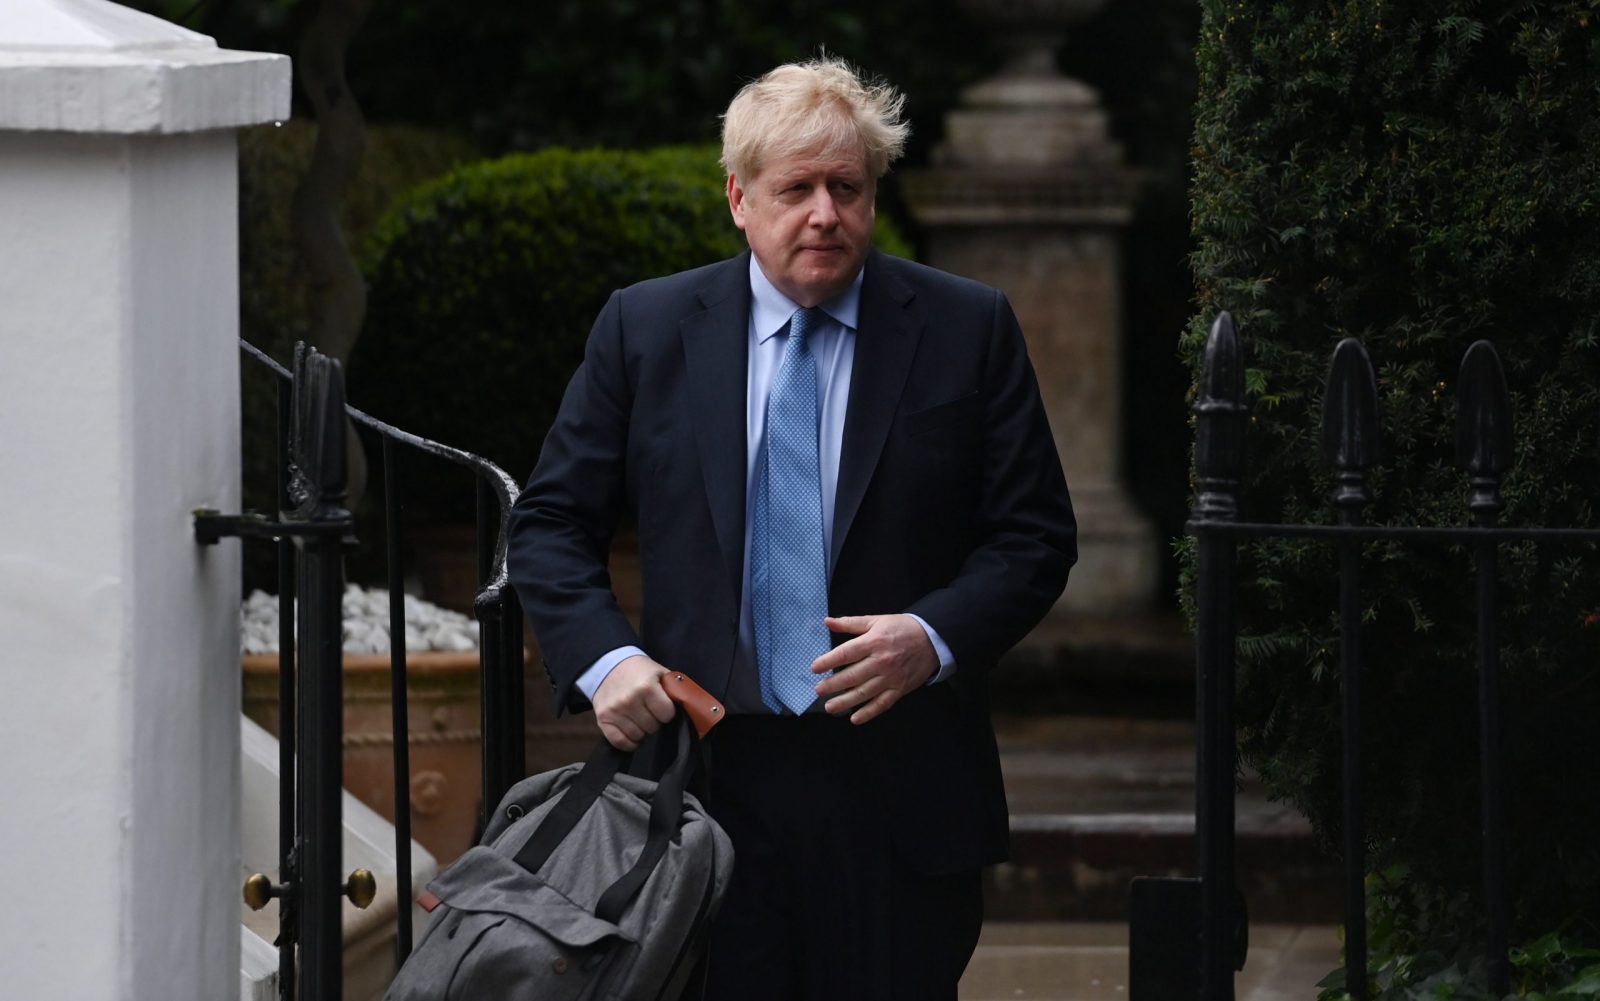 epa10536453 Britain's former Prime Minster Boris Johnson departs his home in London, Britain, 22 March 2023. Johnson is set to give evidence to MPs who are investigating accusations that he misled parliament over Partygate after breaching covid rules in 2020.  EPA/NEIL HALL